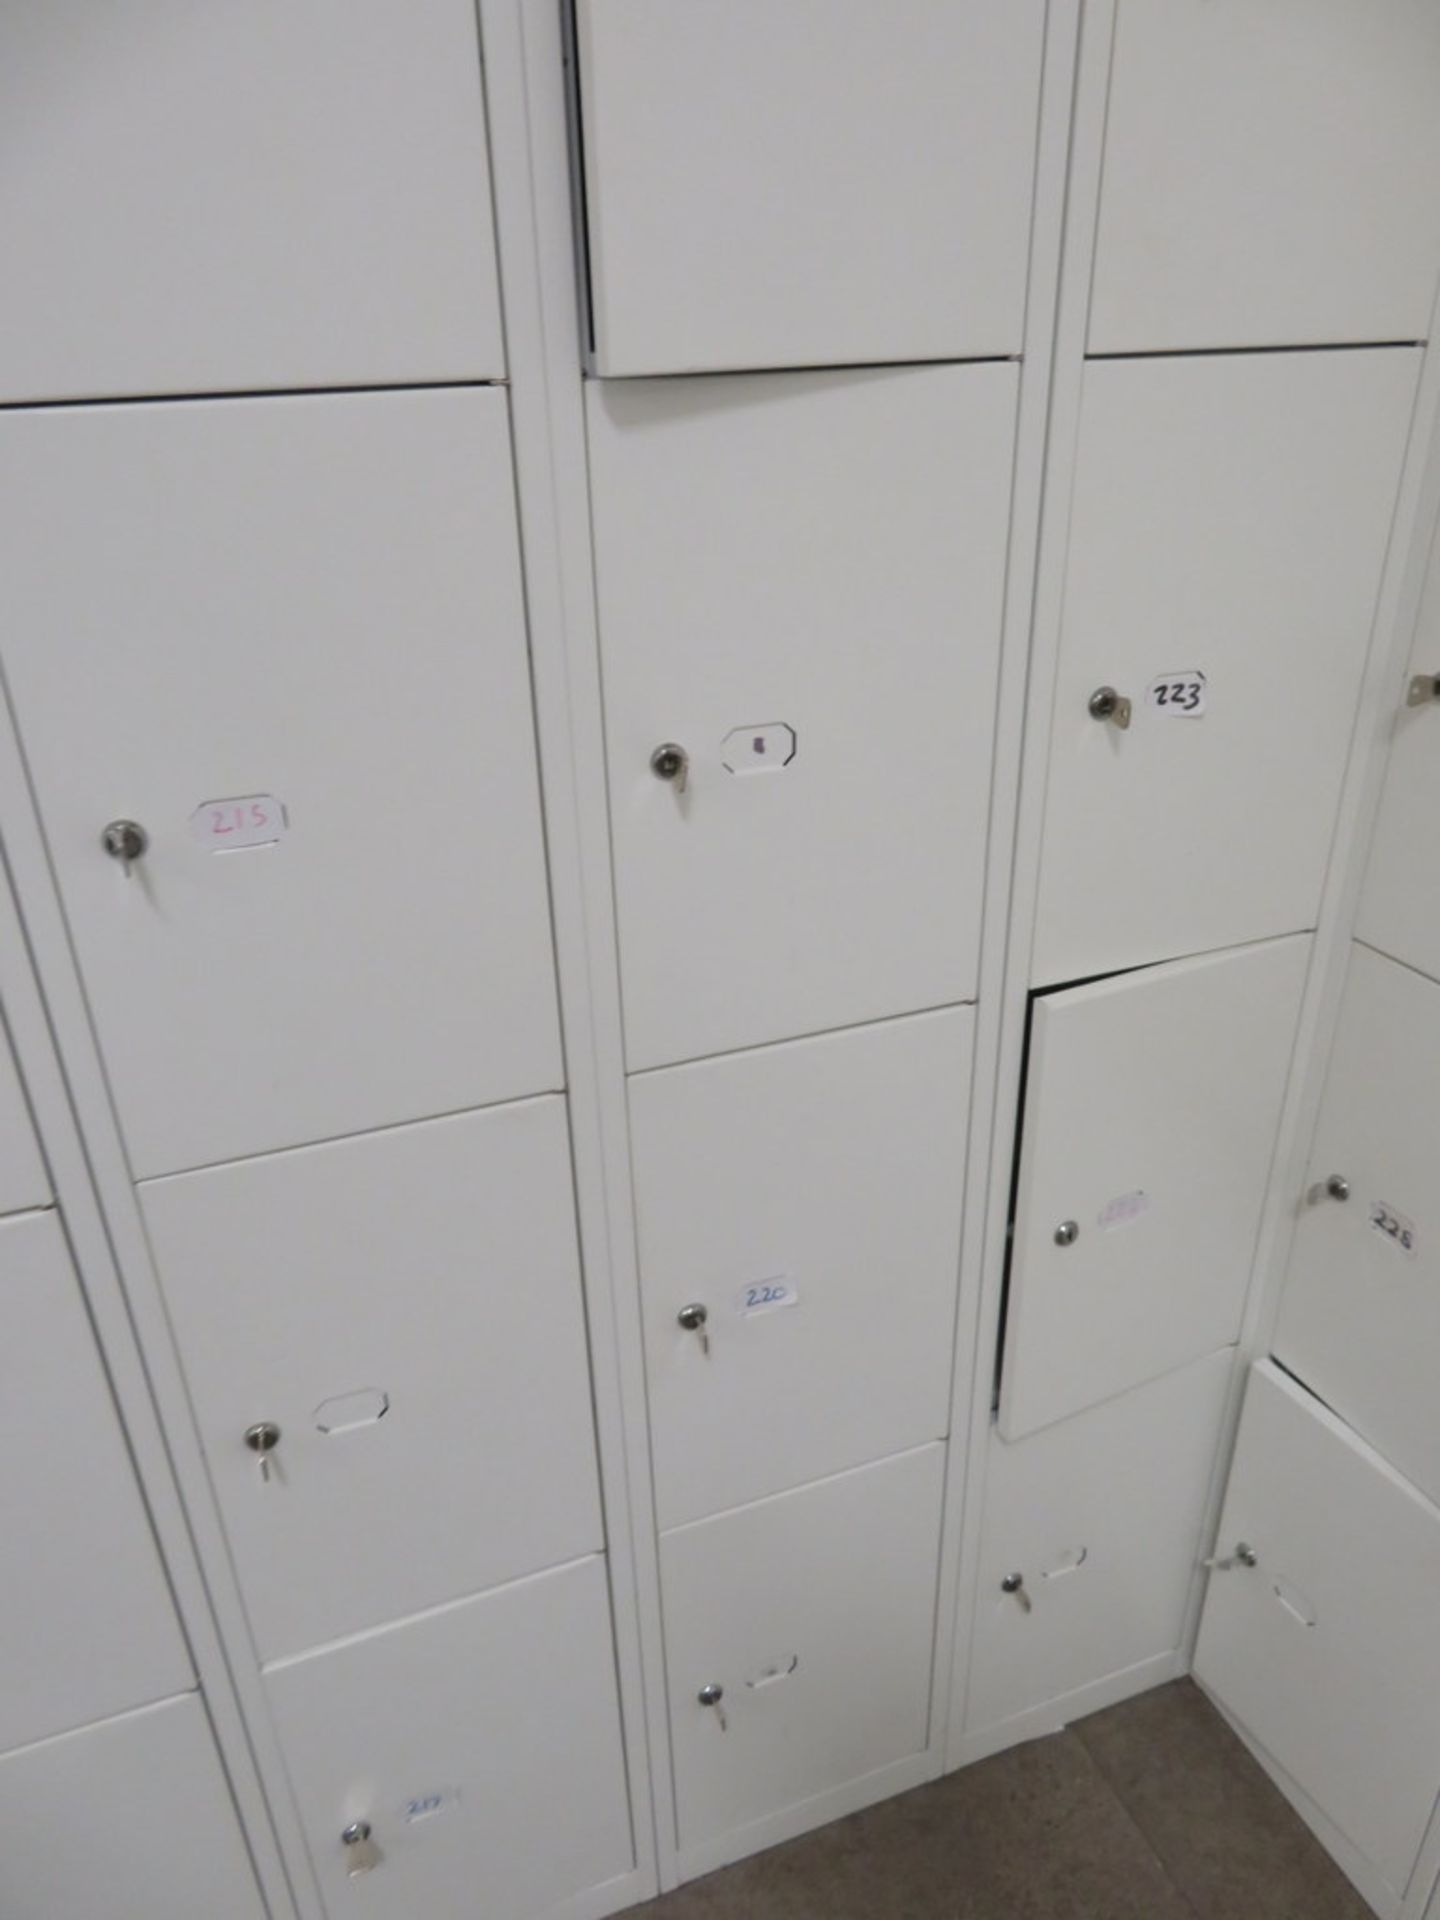 5x Bisley 4 Compartment Personnel Locker. - Image 2 of 3